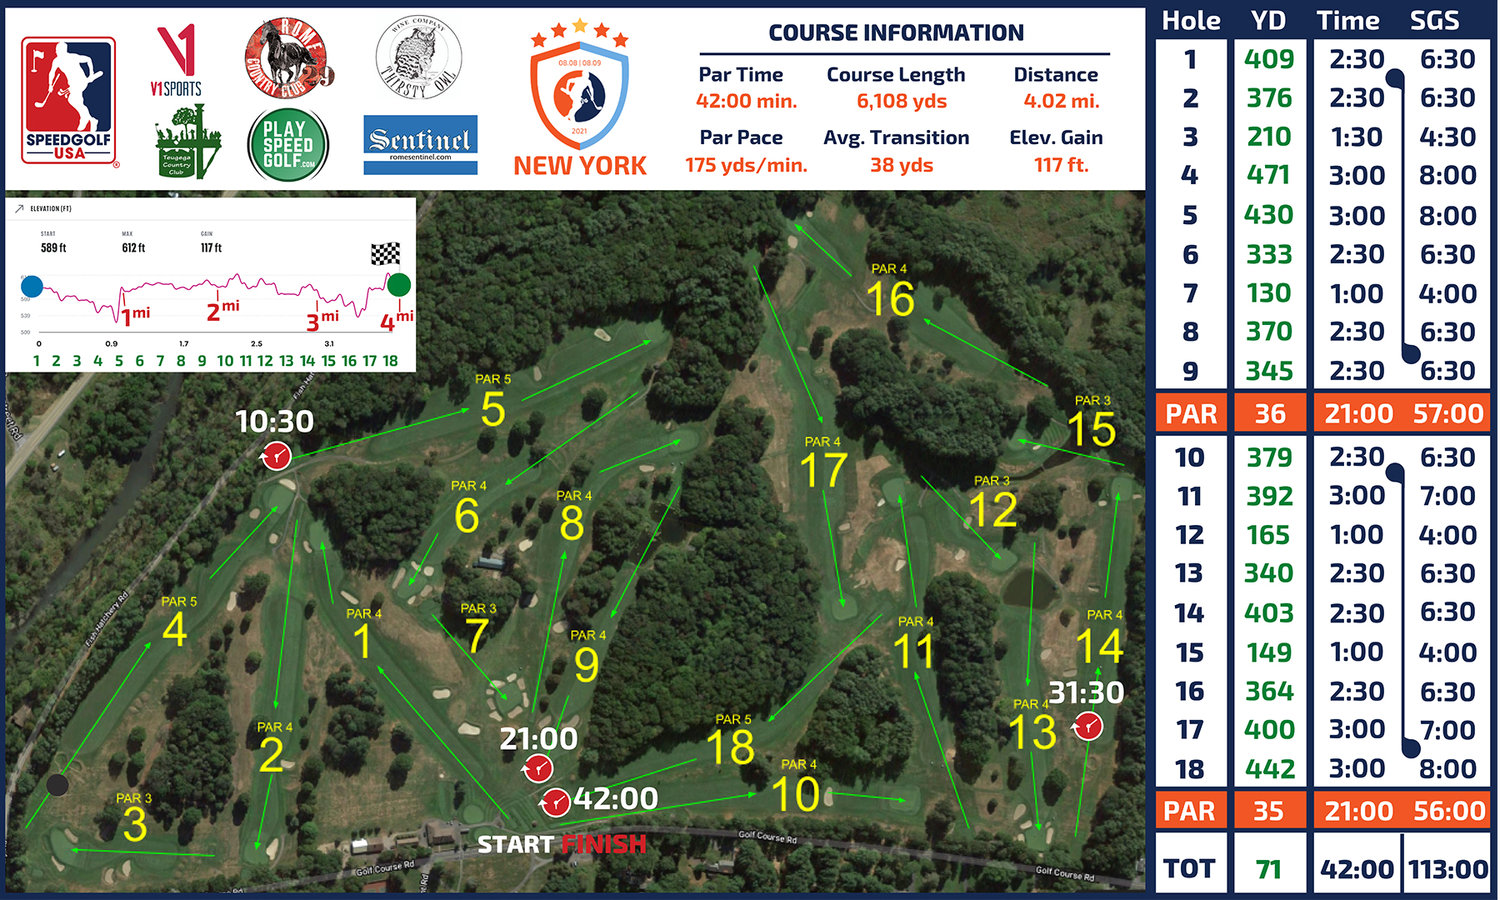 DAY ONE LAYOUT — A GPS shot of the layout of Teugega Country Club ahead of Sunday’s first round of the New York Speedgolf Open.